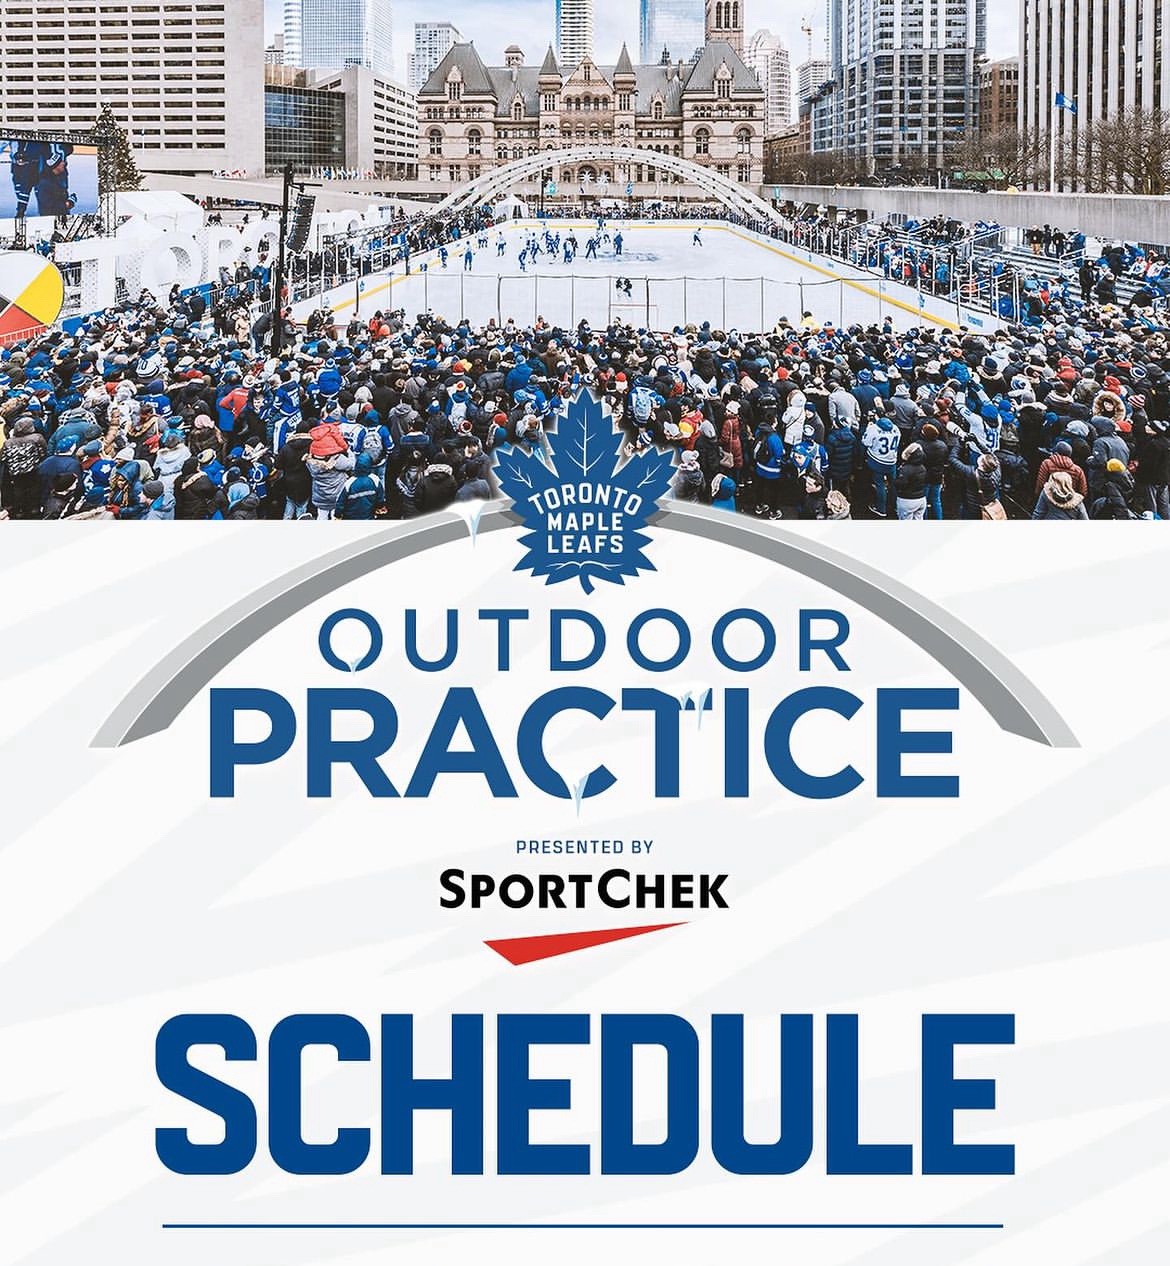 Toronto Maple Leafs Outdoor Practice at Nathan Phillips Square